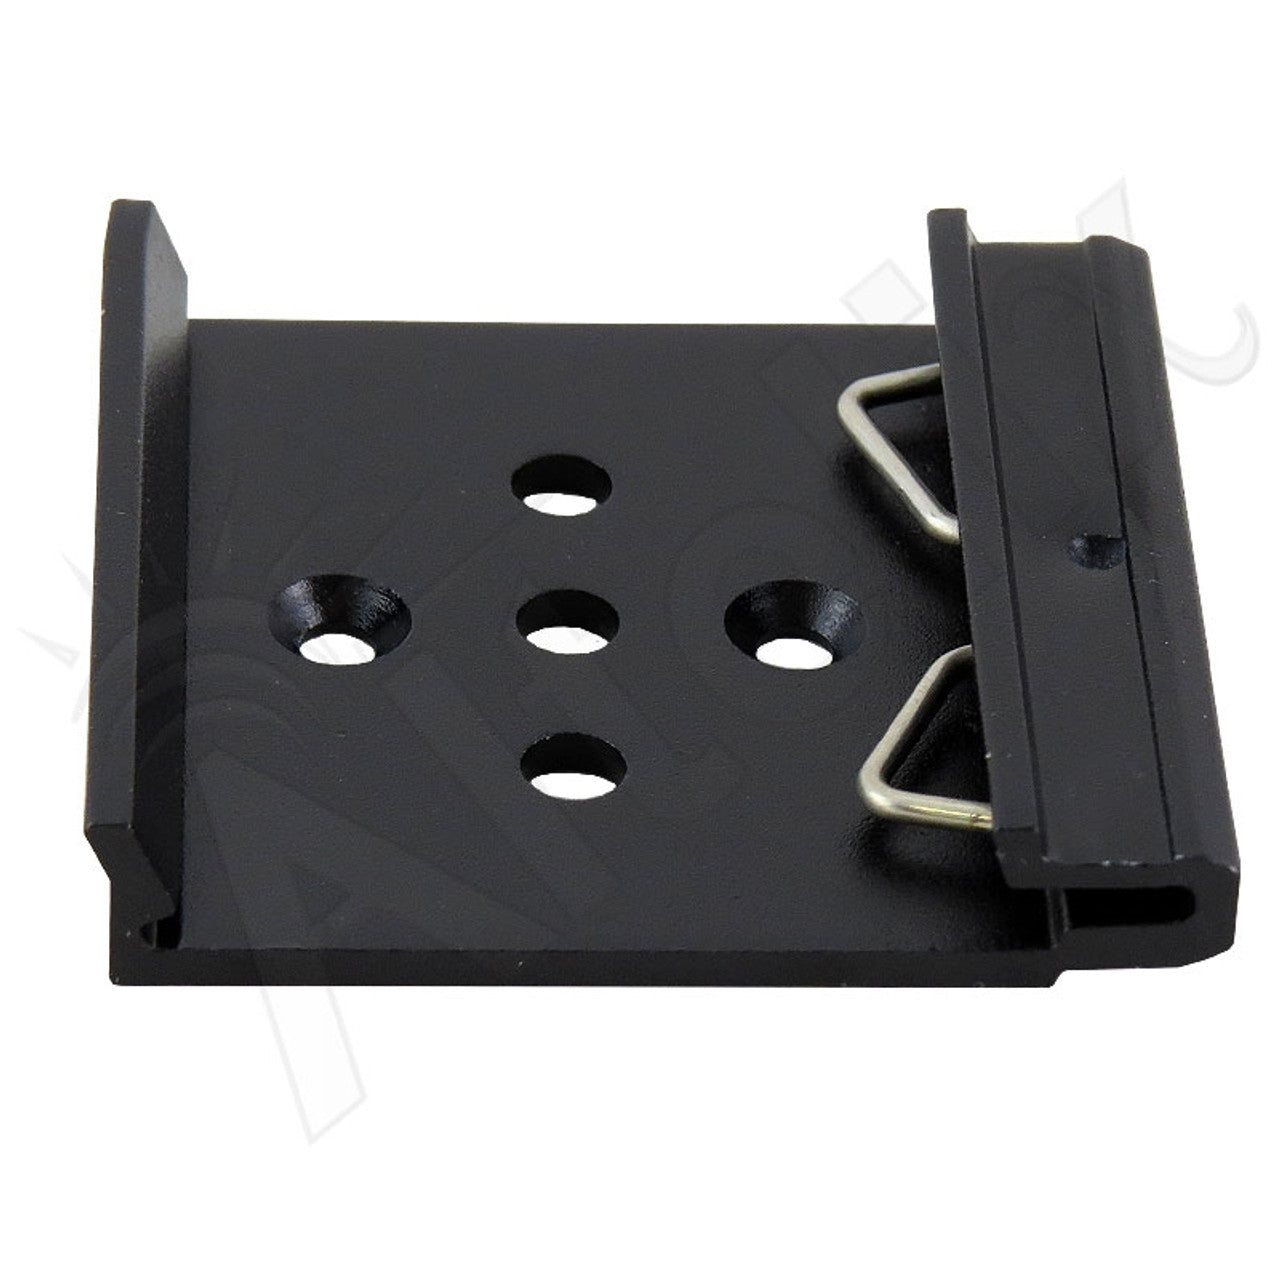 45mm Wide Aluminum DIN Rail Mounting Clip for 35mm Top Hat Rail